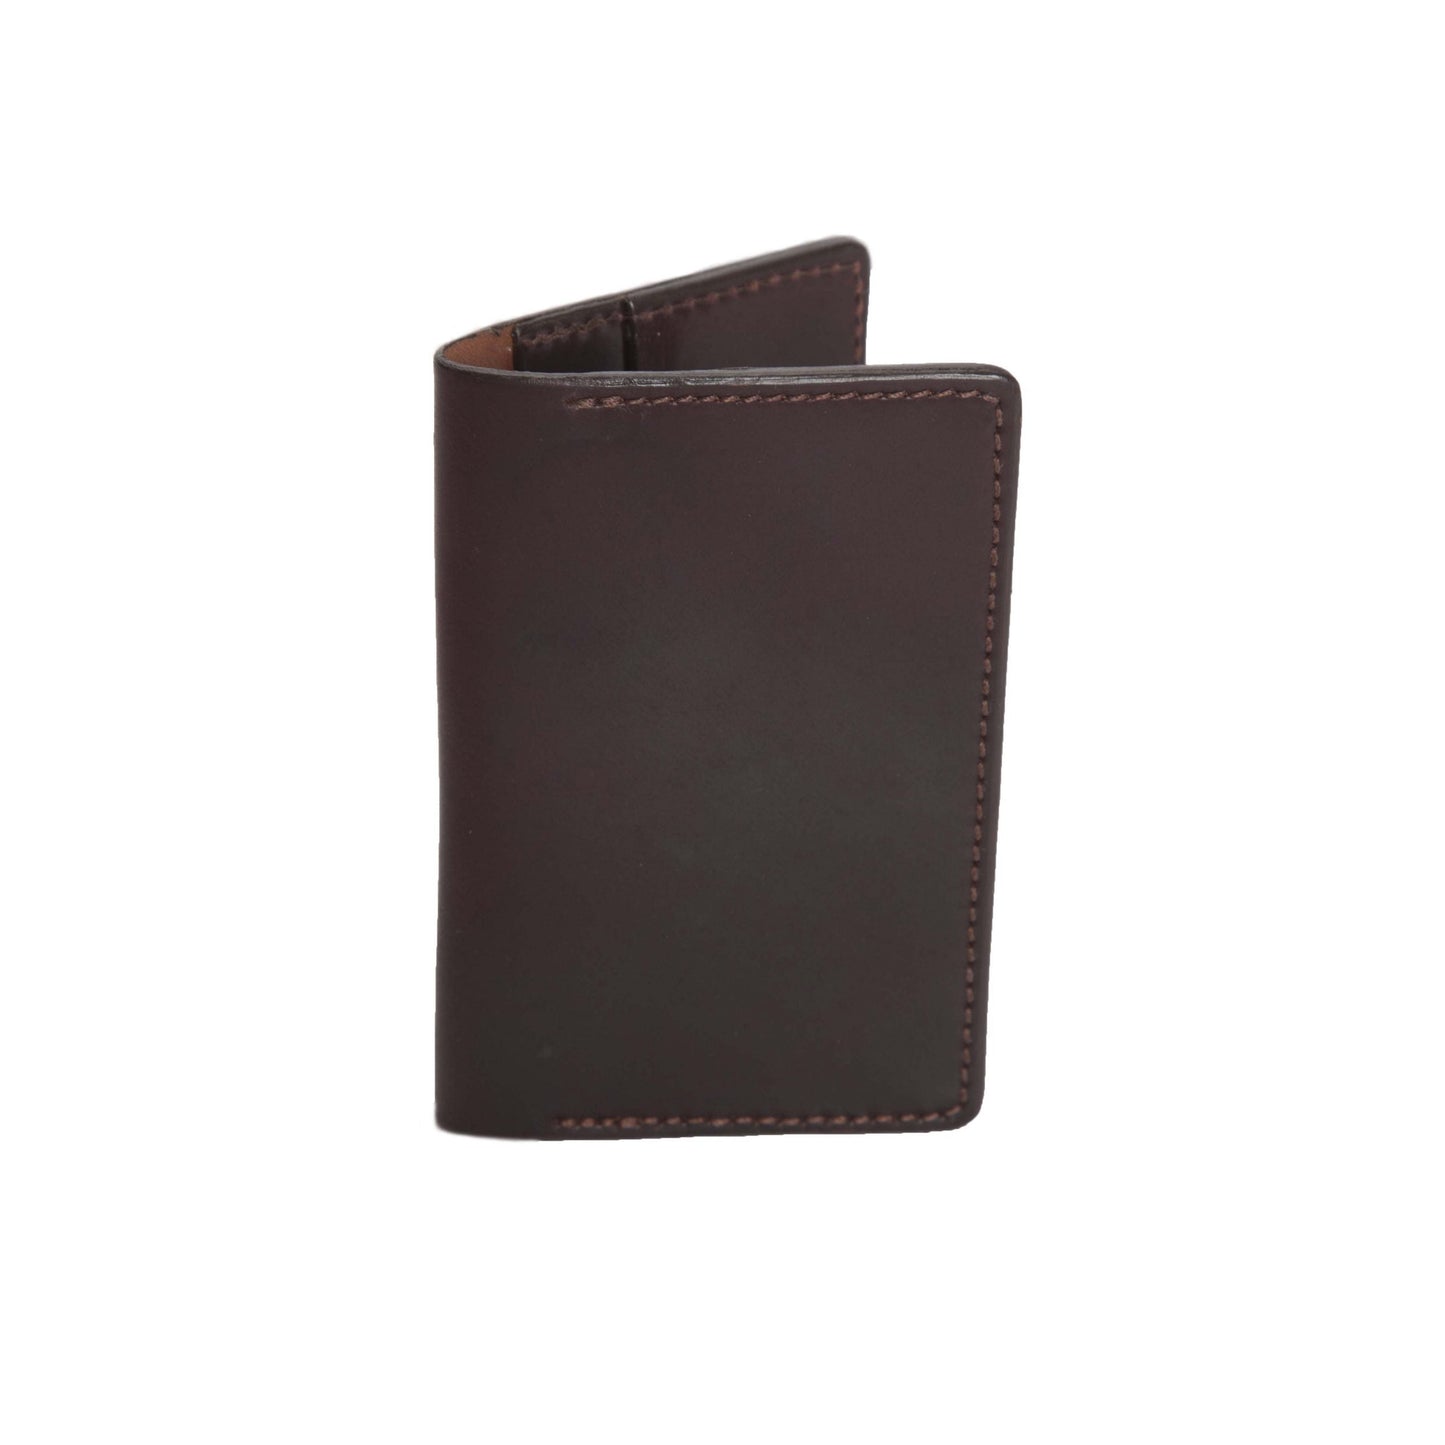 Credit Card Wallet in Shell Cordovan